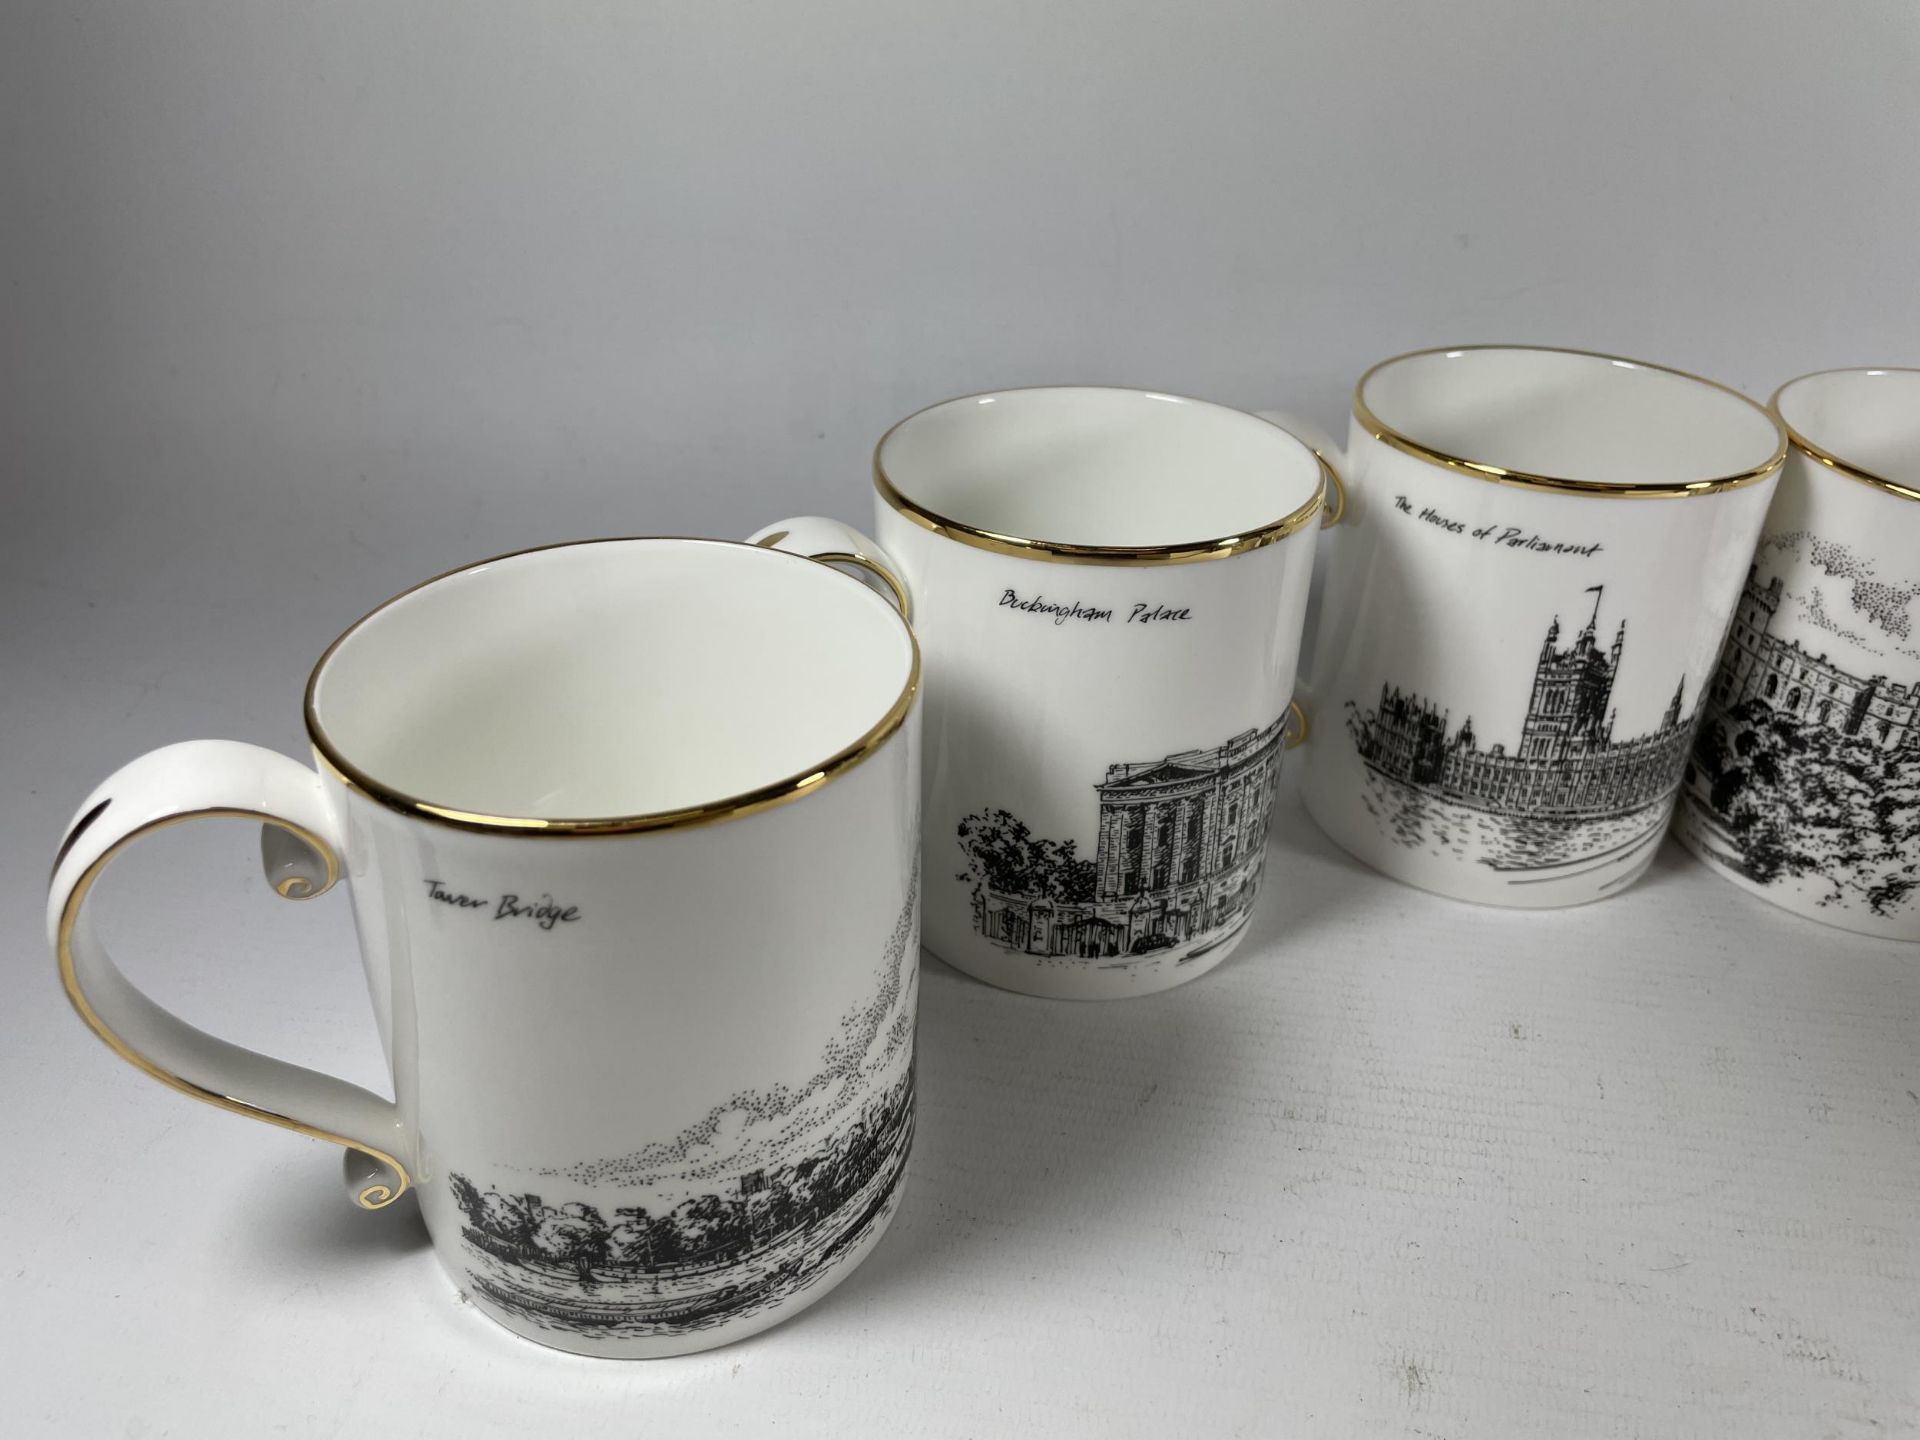 SIX GOODWIN CHINA CUPS WITH SCENES OF LONDON - Image 4 of 4